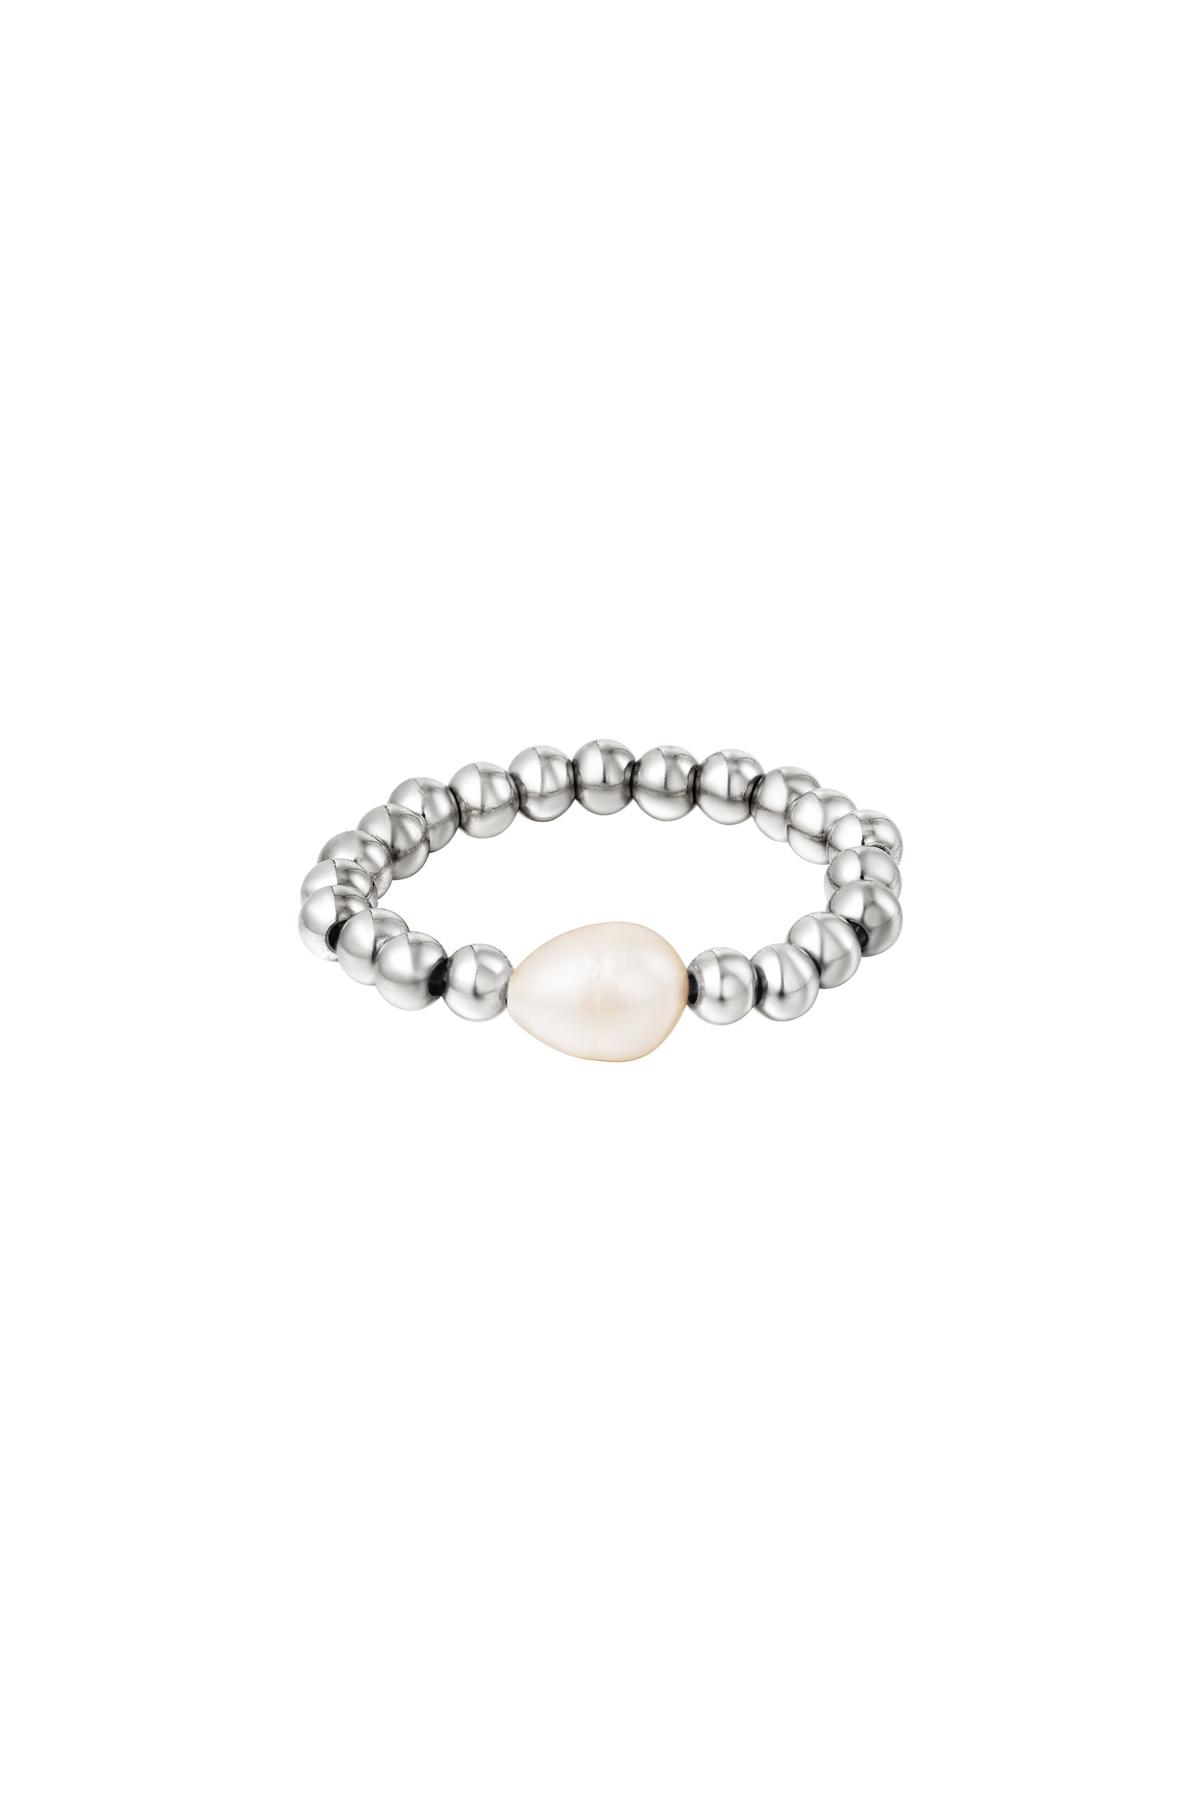 Ring pearl Silver Stainless Steel 17